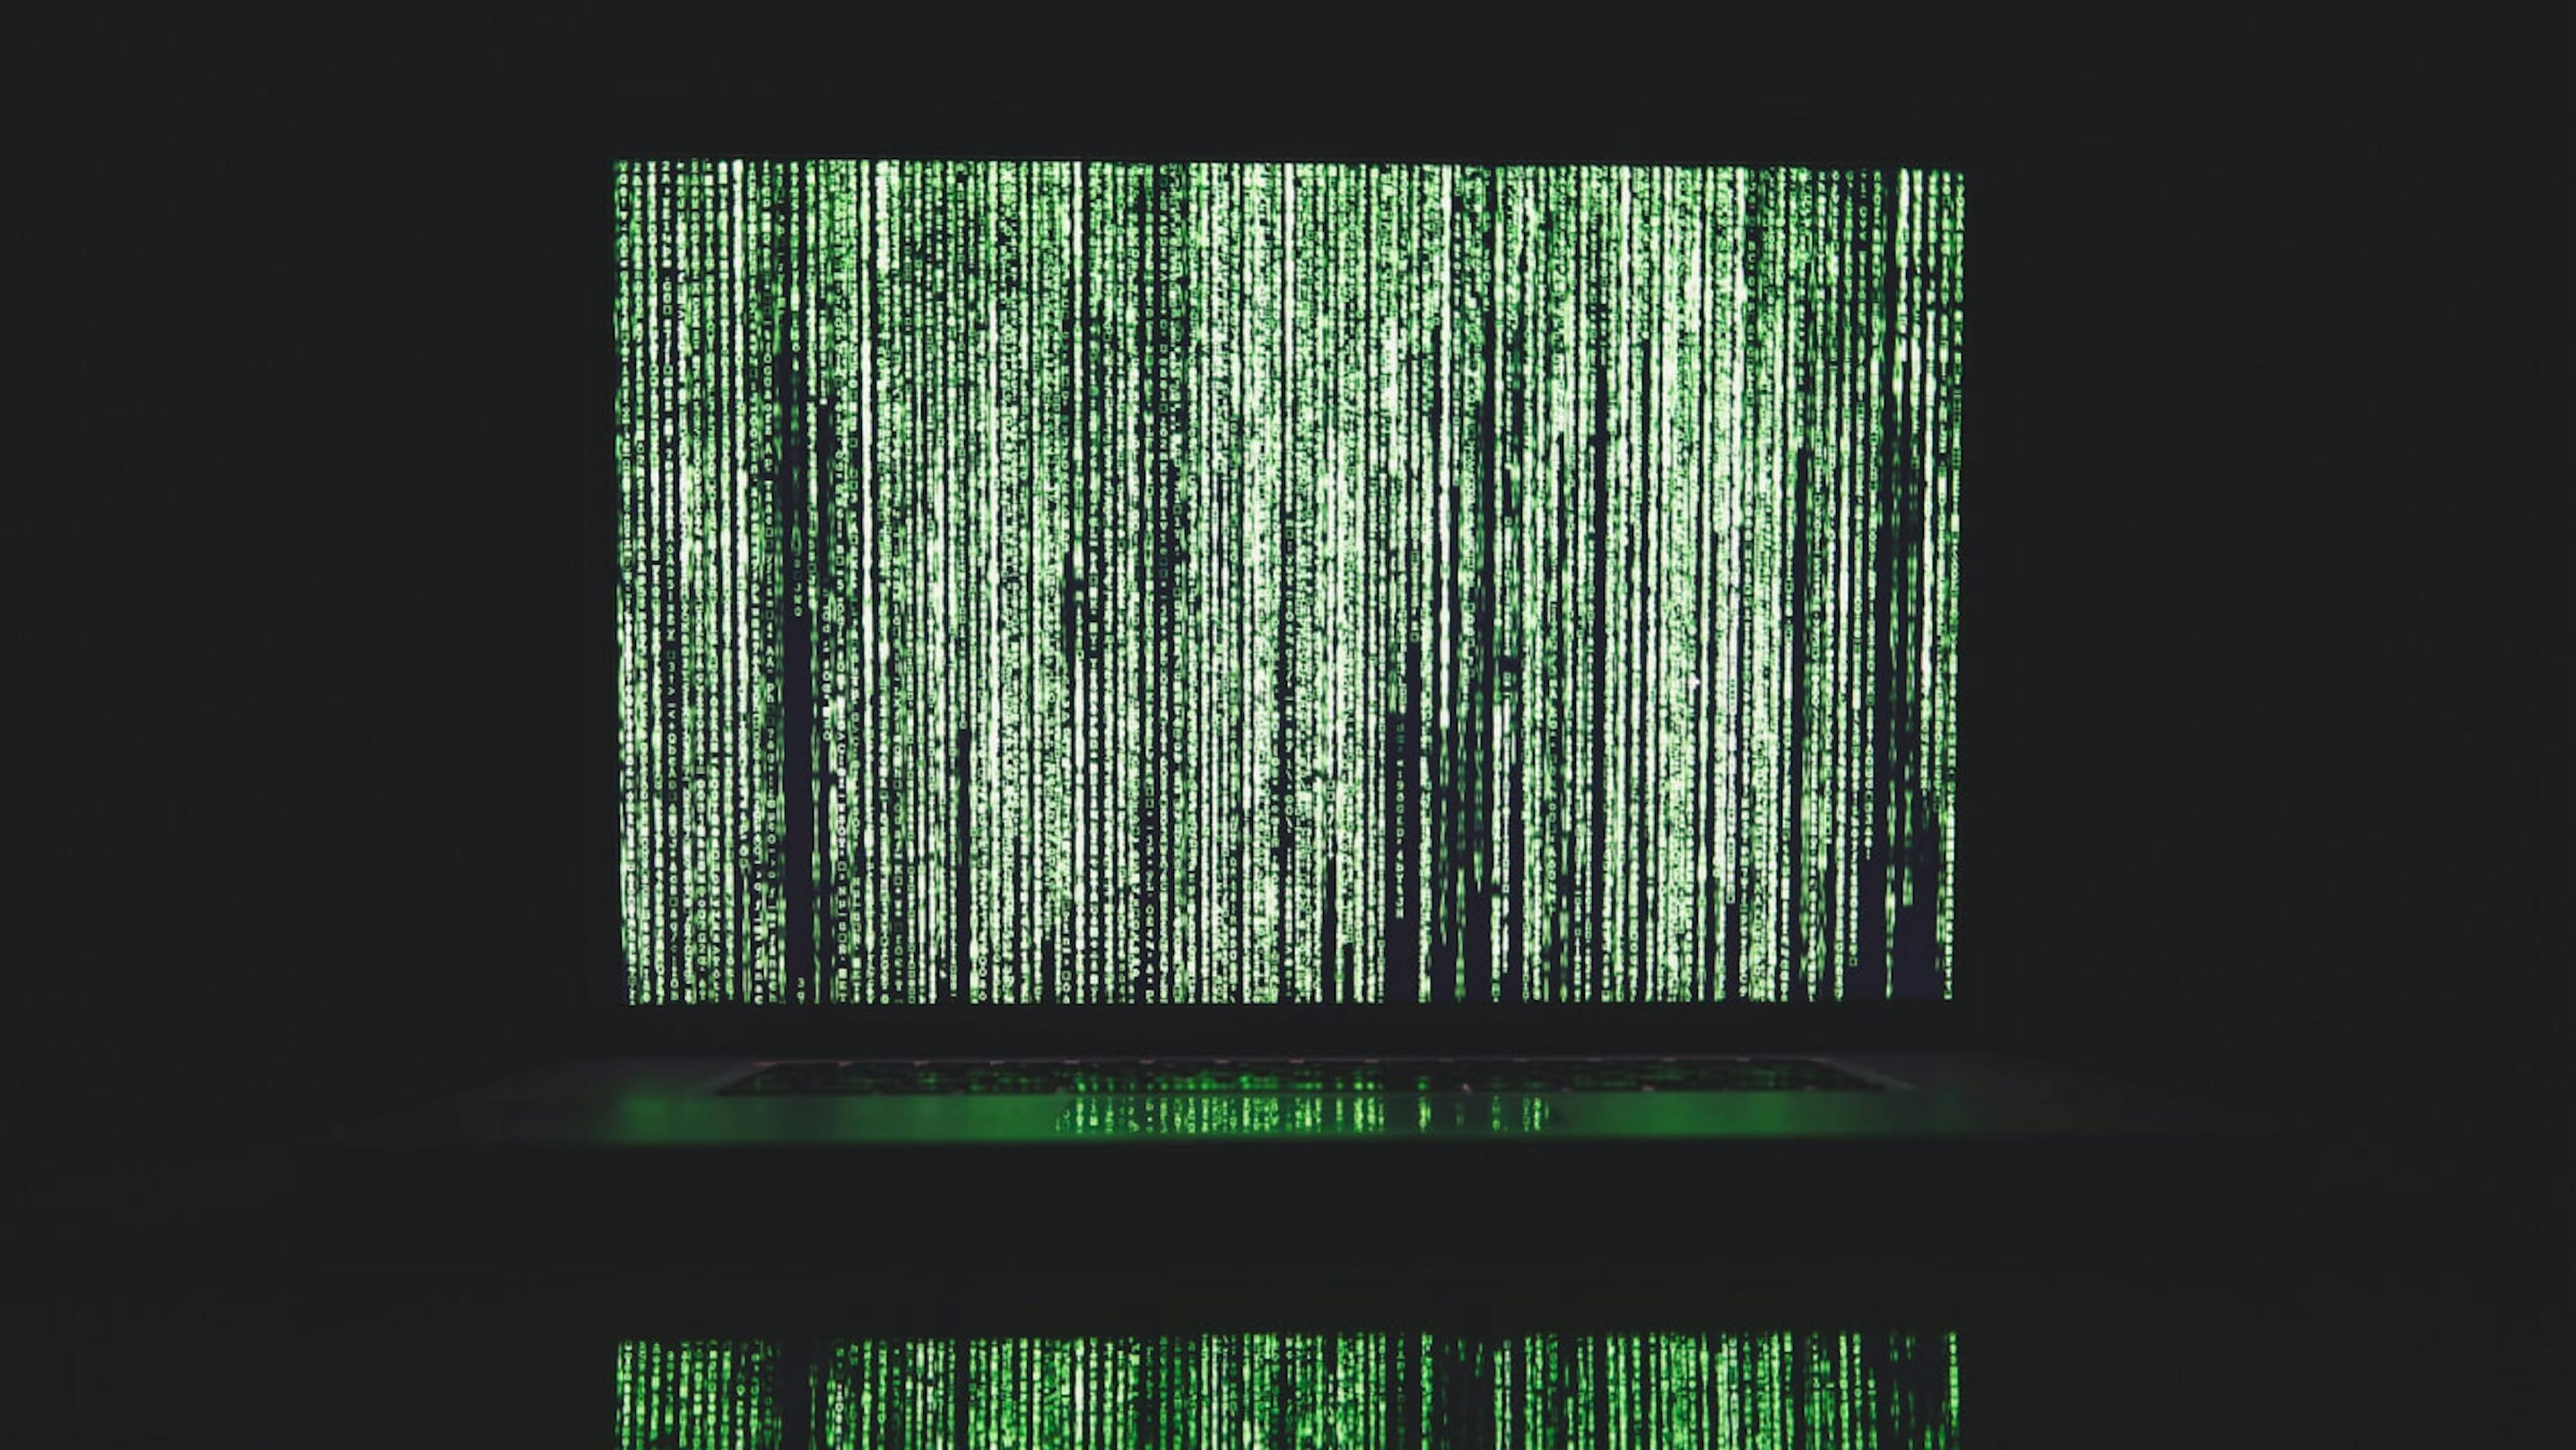 Online conspiracy theories can make life feel like the movie, The Matrix.